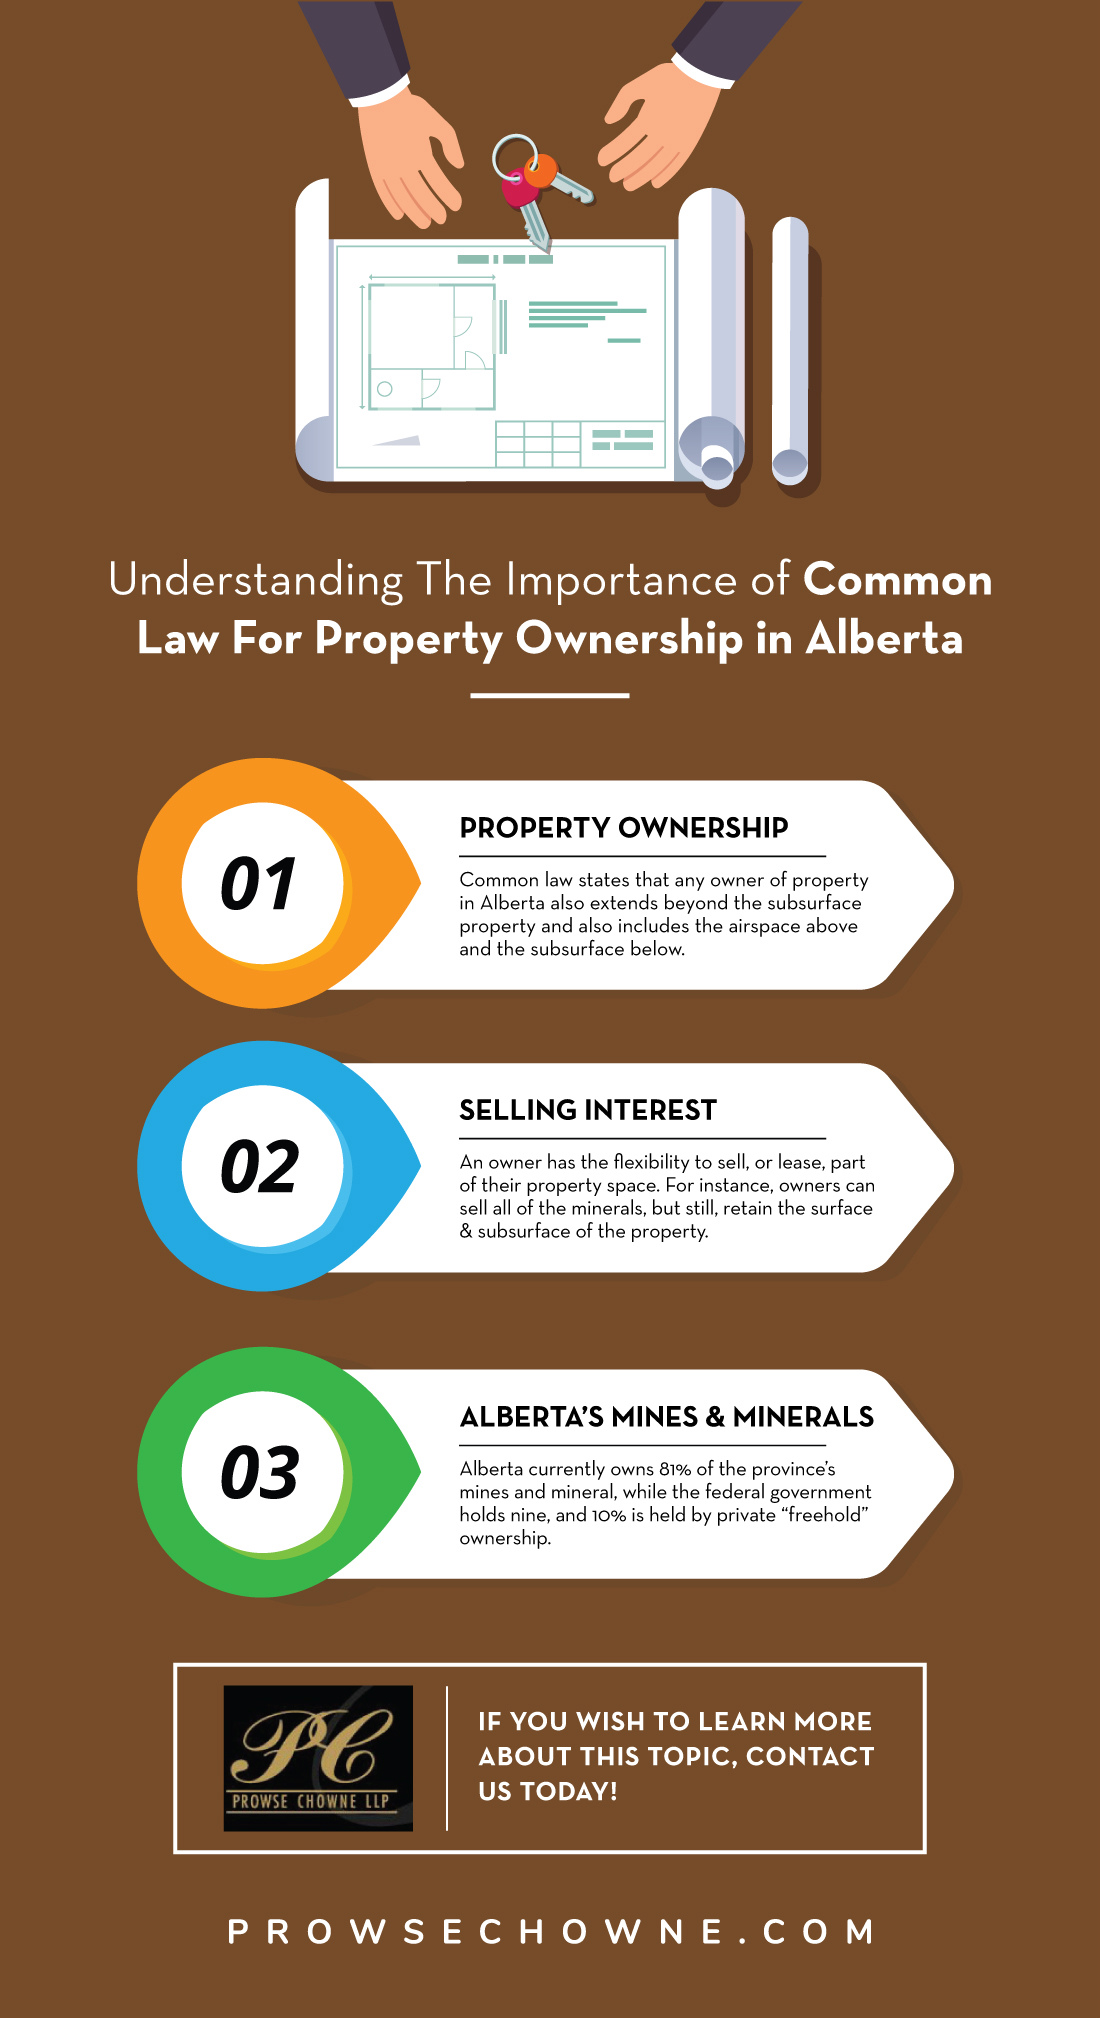 Law for Property Ownership in Alberta